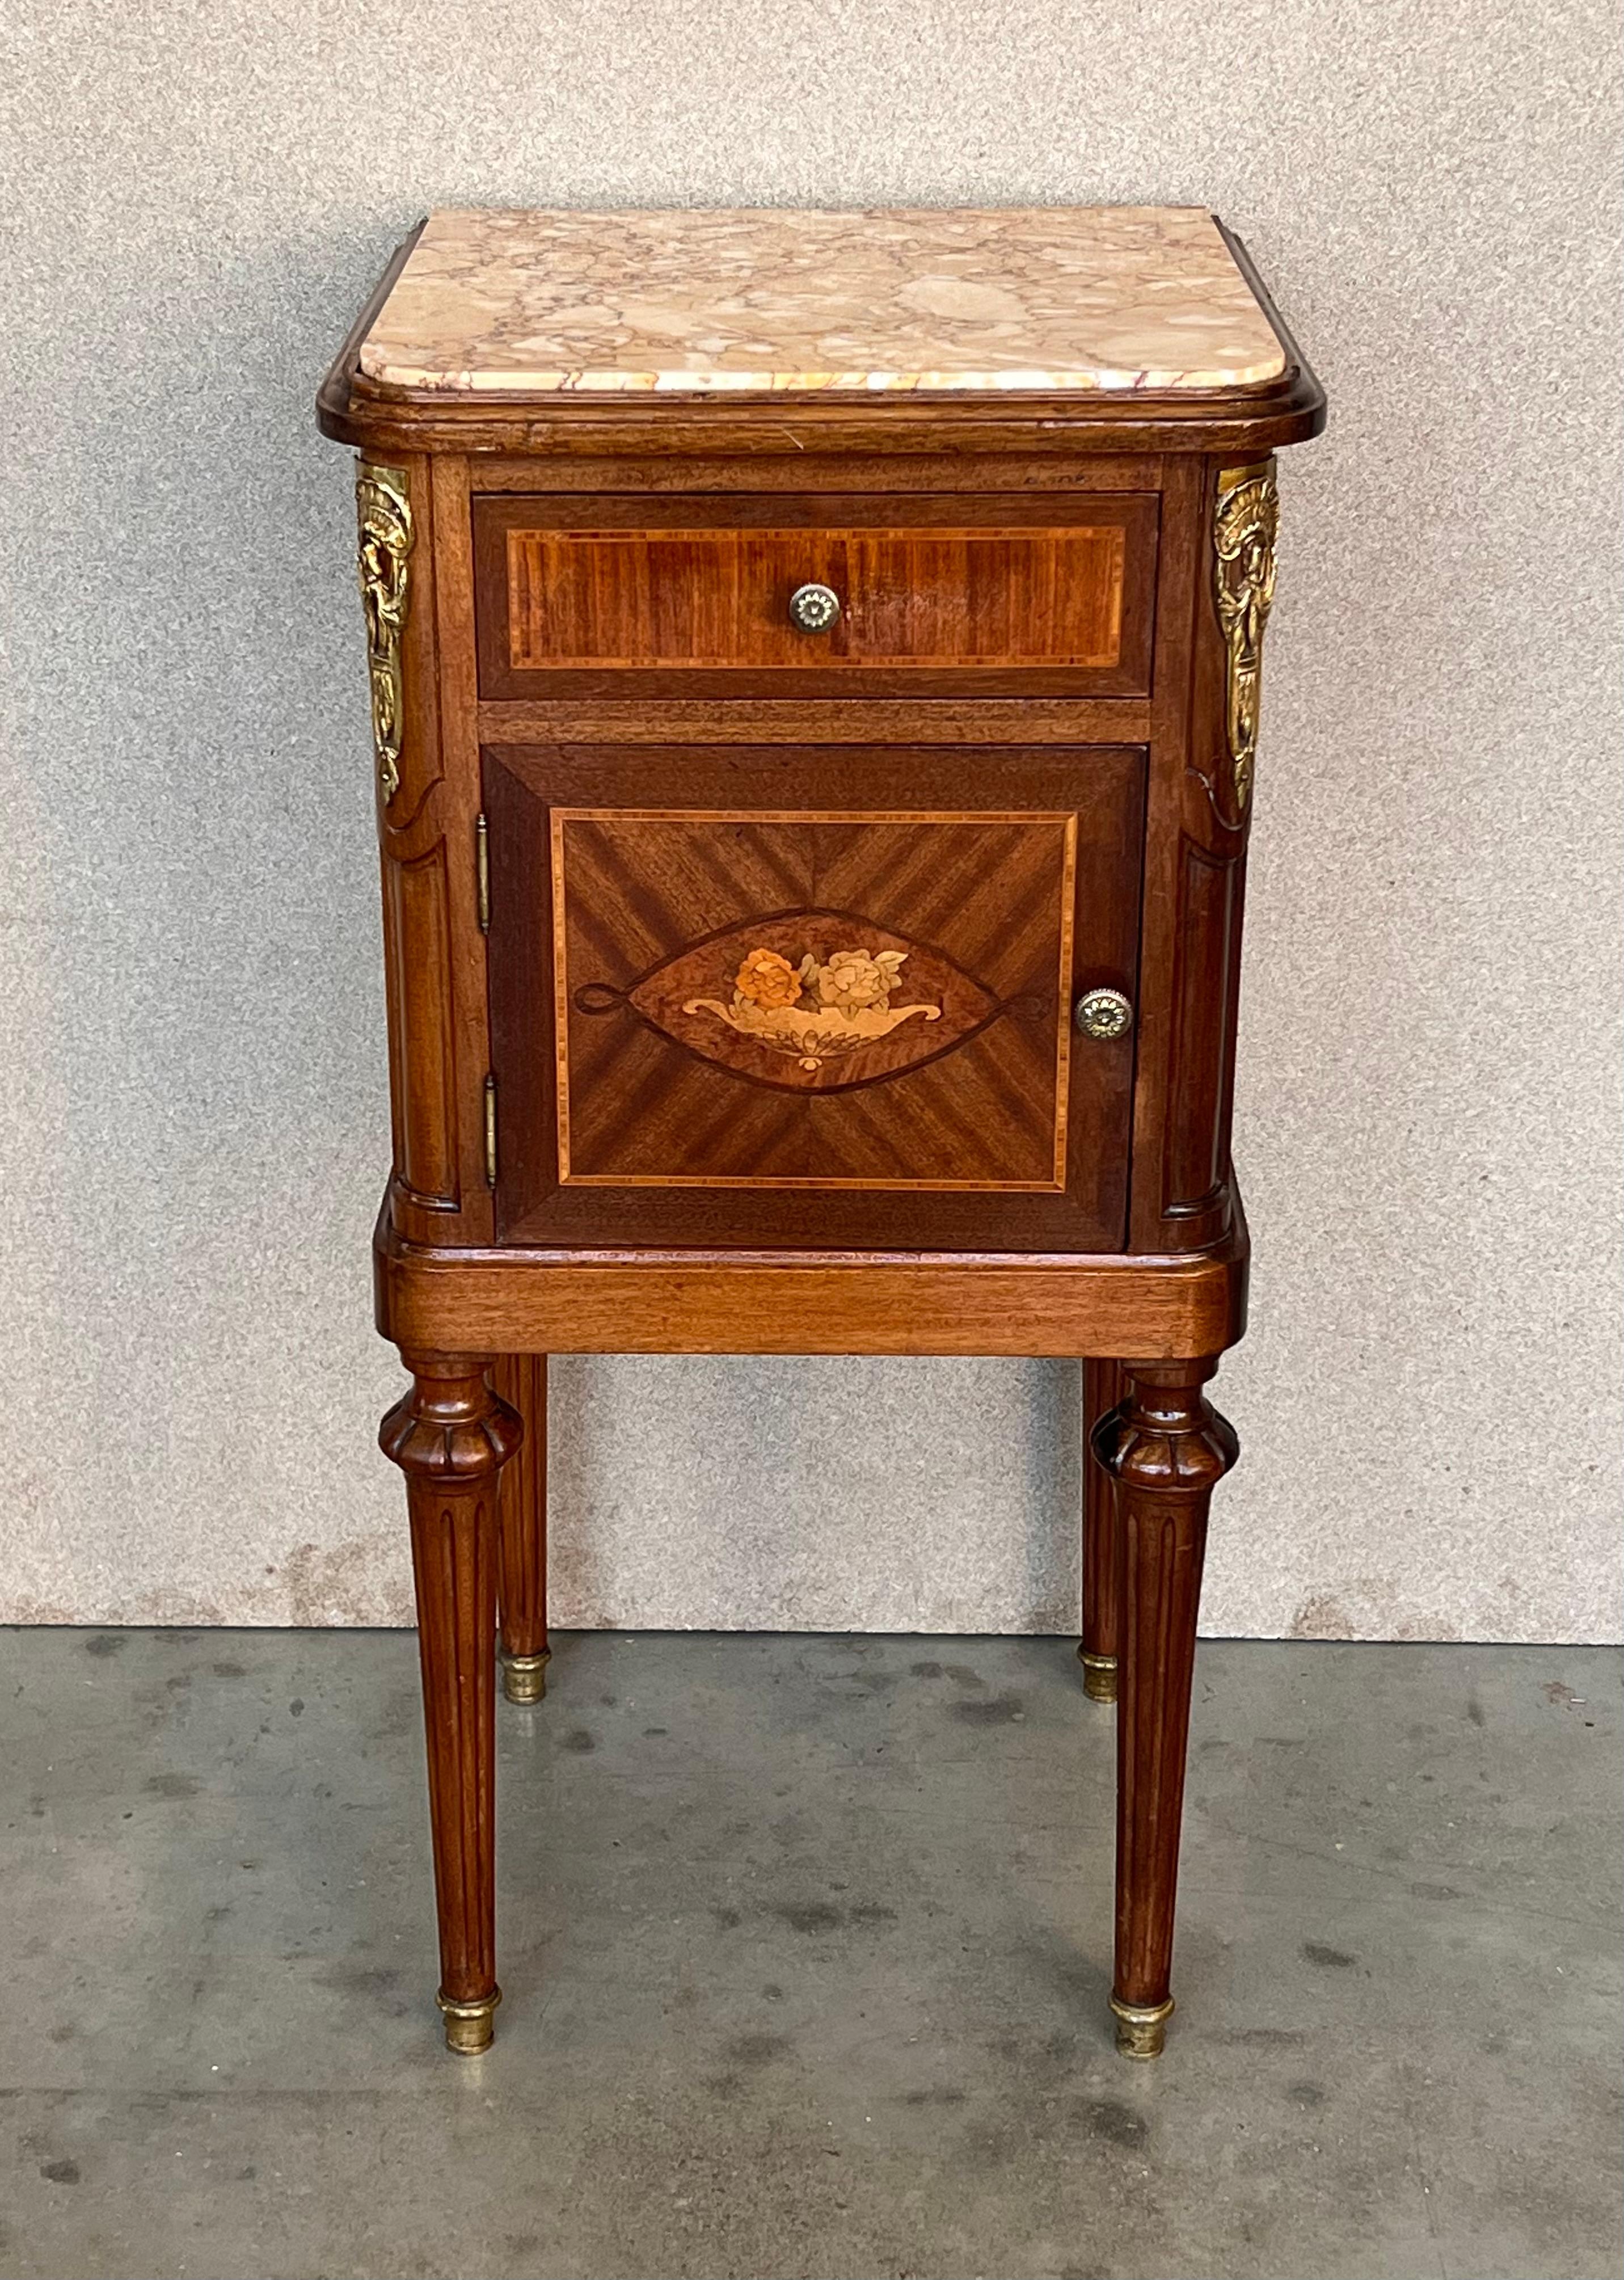 A rare and impressive French mahogany parquetry bedside cabinet in style important 19th century ébéniste (cabinetmaker) Grohe Frères. This magnificent cabinet is exquisitely handcrafted, dating to the third quarter of the 19th century, it's